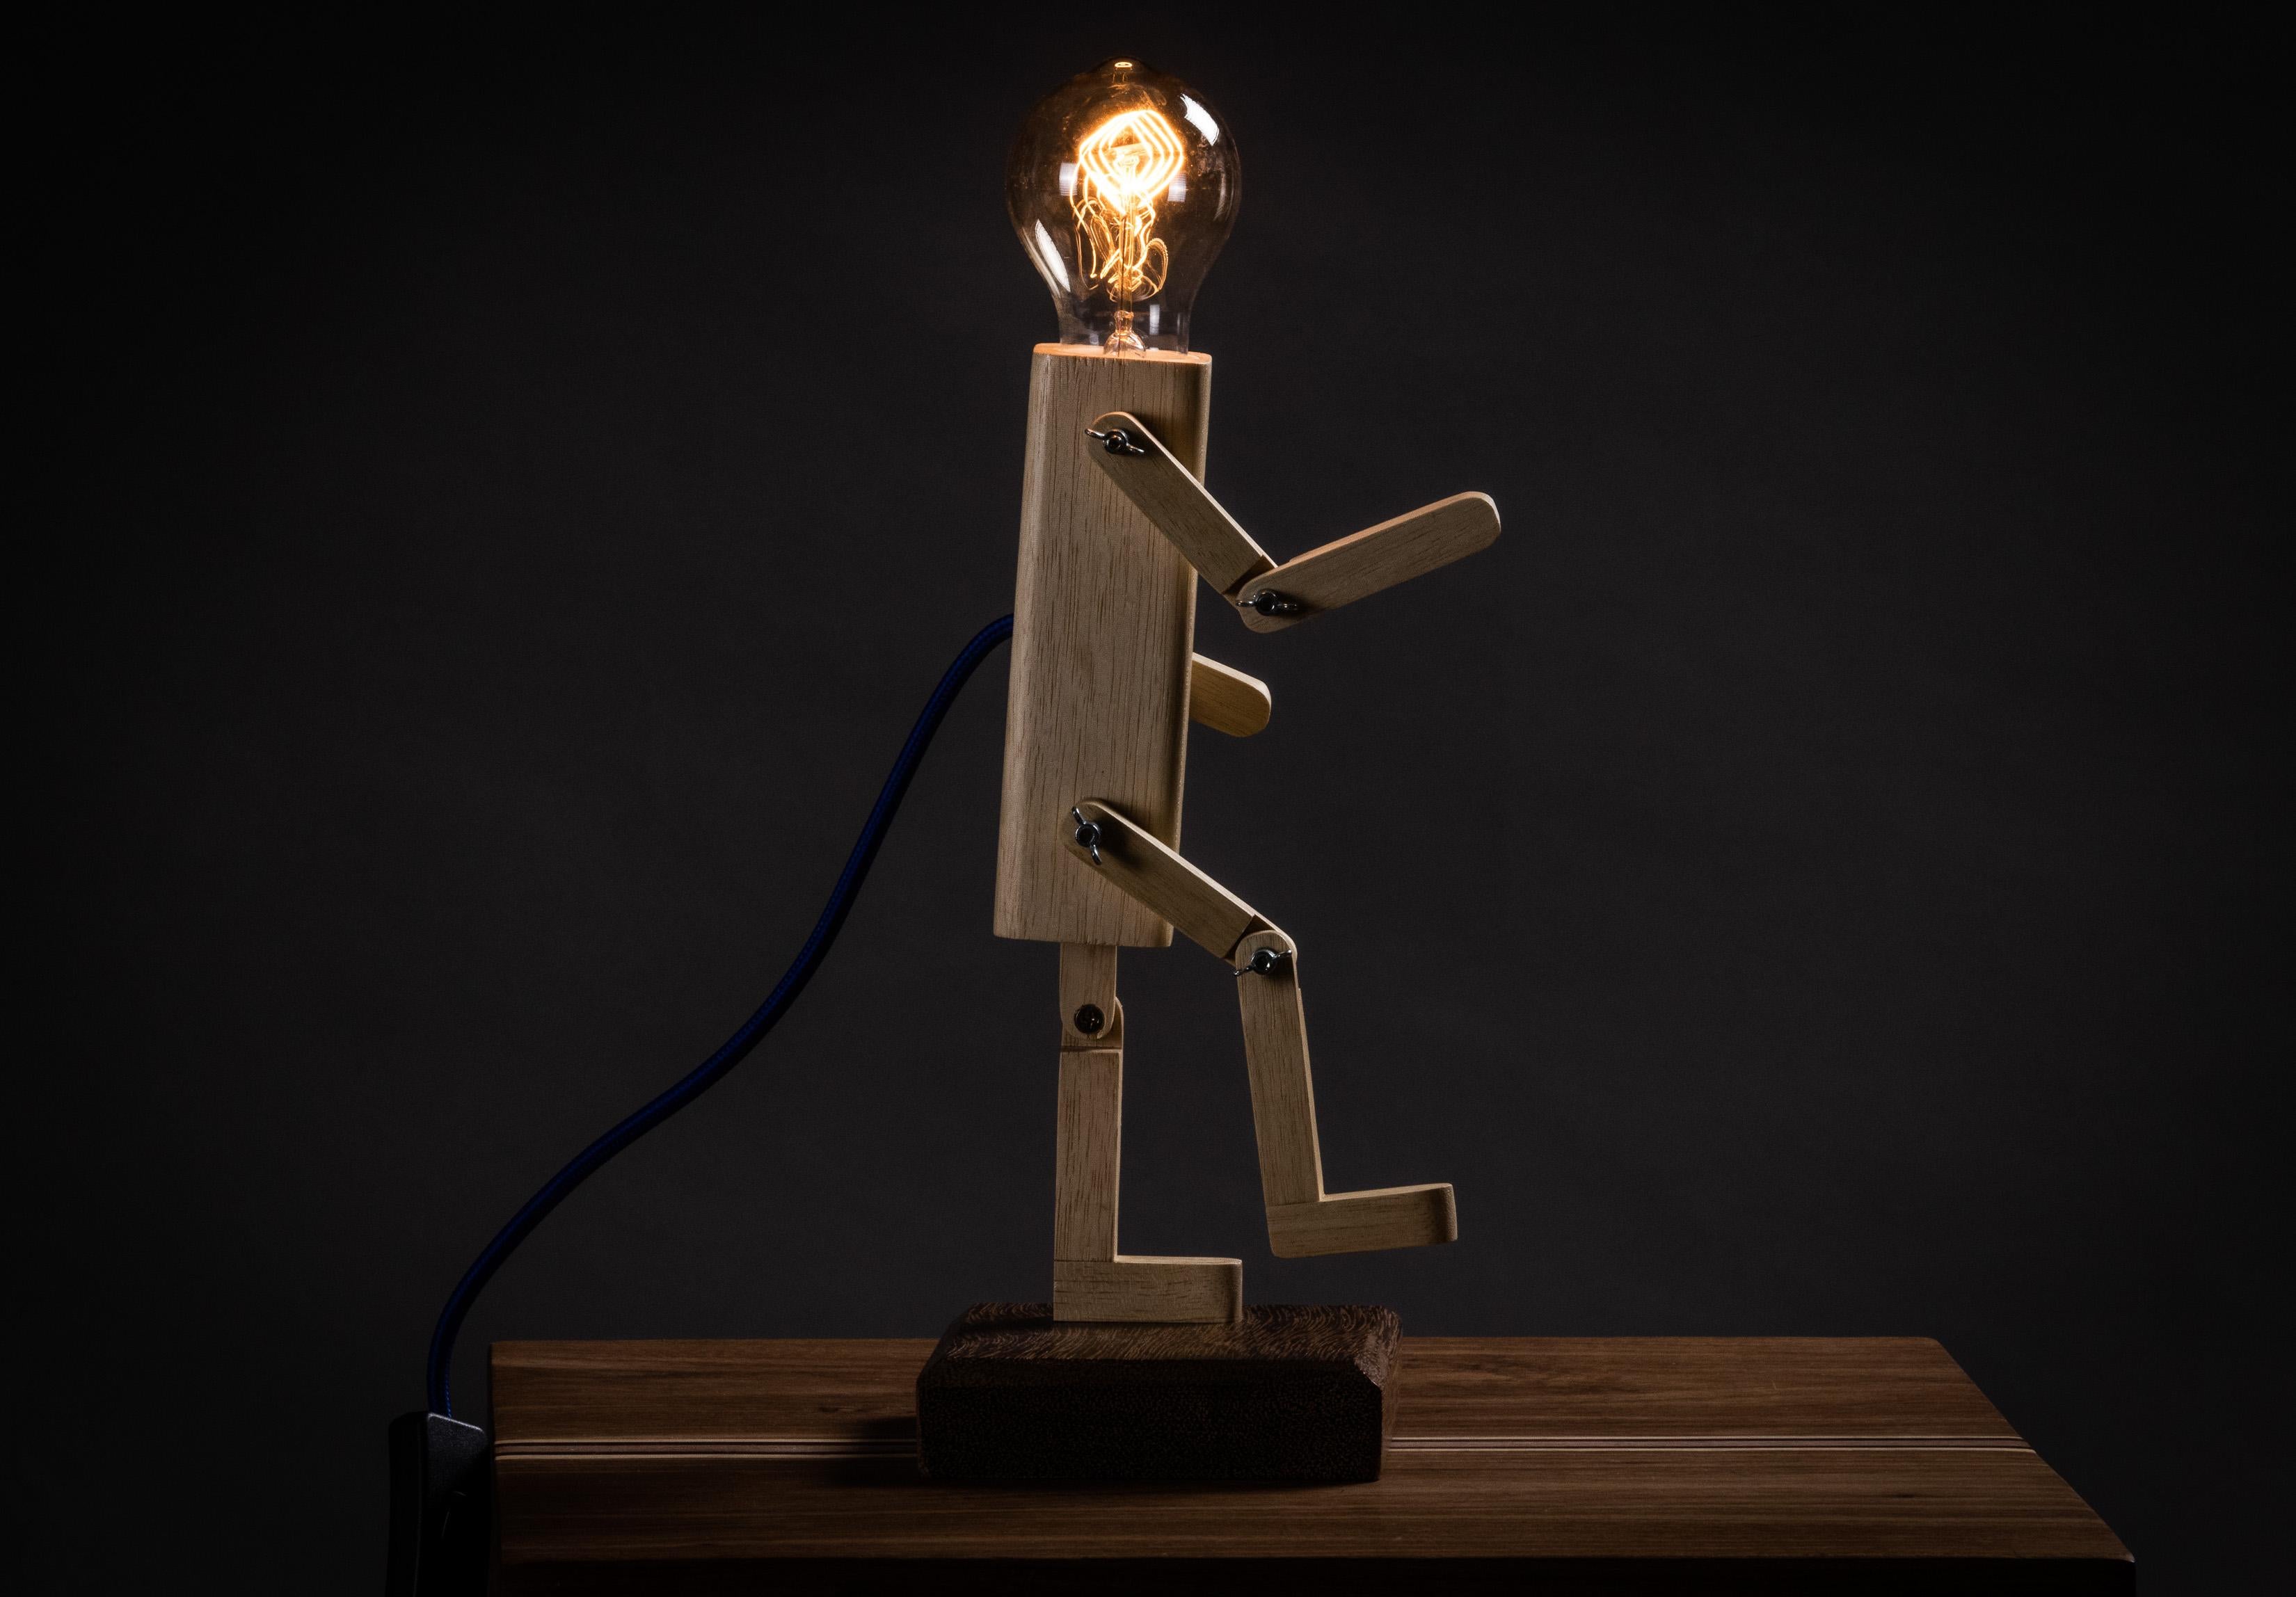 Playful and articulated lamp, made of solid caixeta and jequitibá wood, allowing for numerous movements and positions. The dark version is charred using the Japanese technique Shou Sugi Ban.50